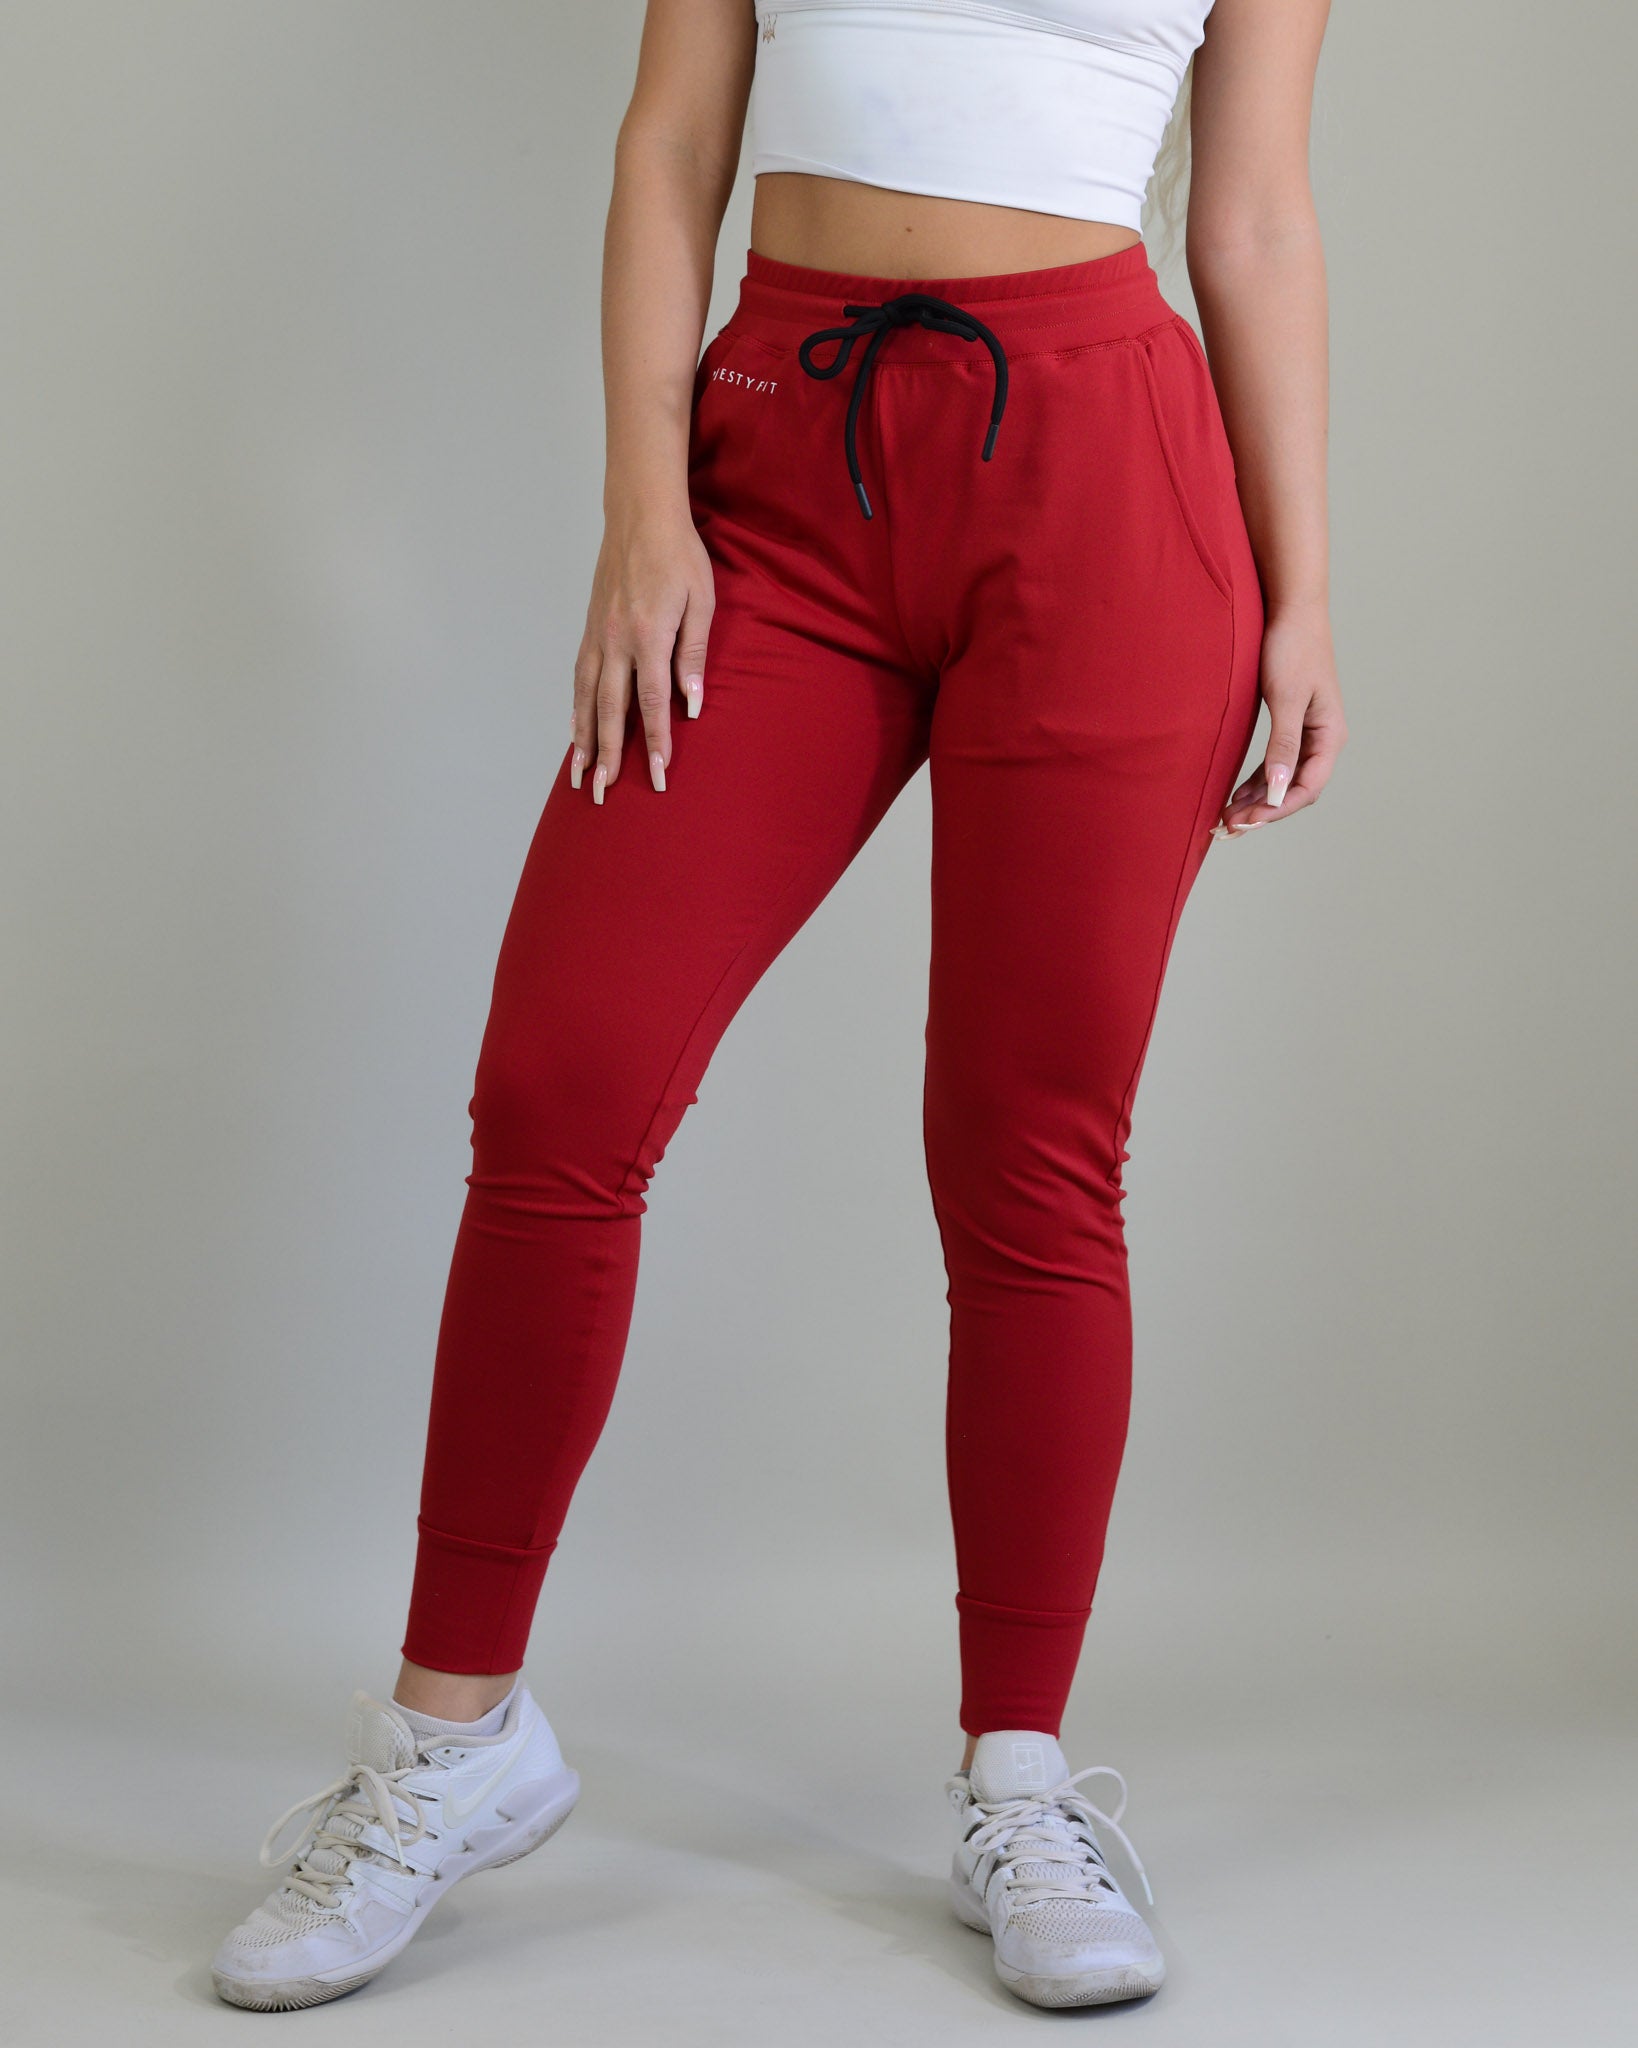 Queen's Royal Jogger - Red